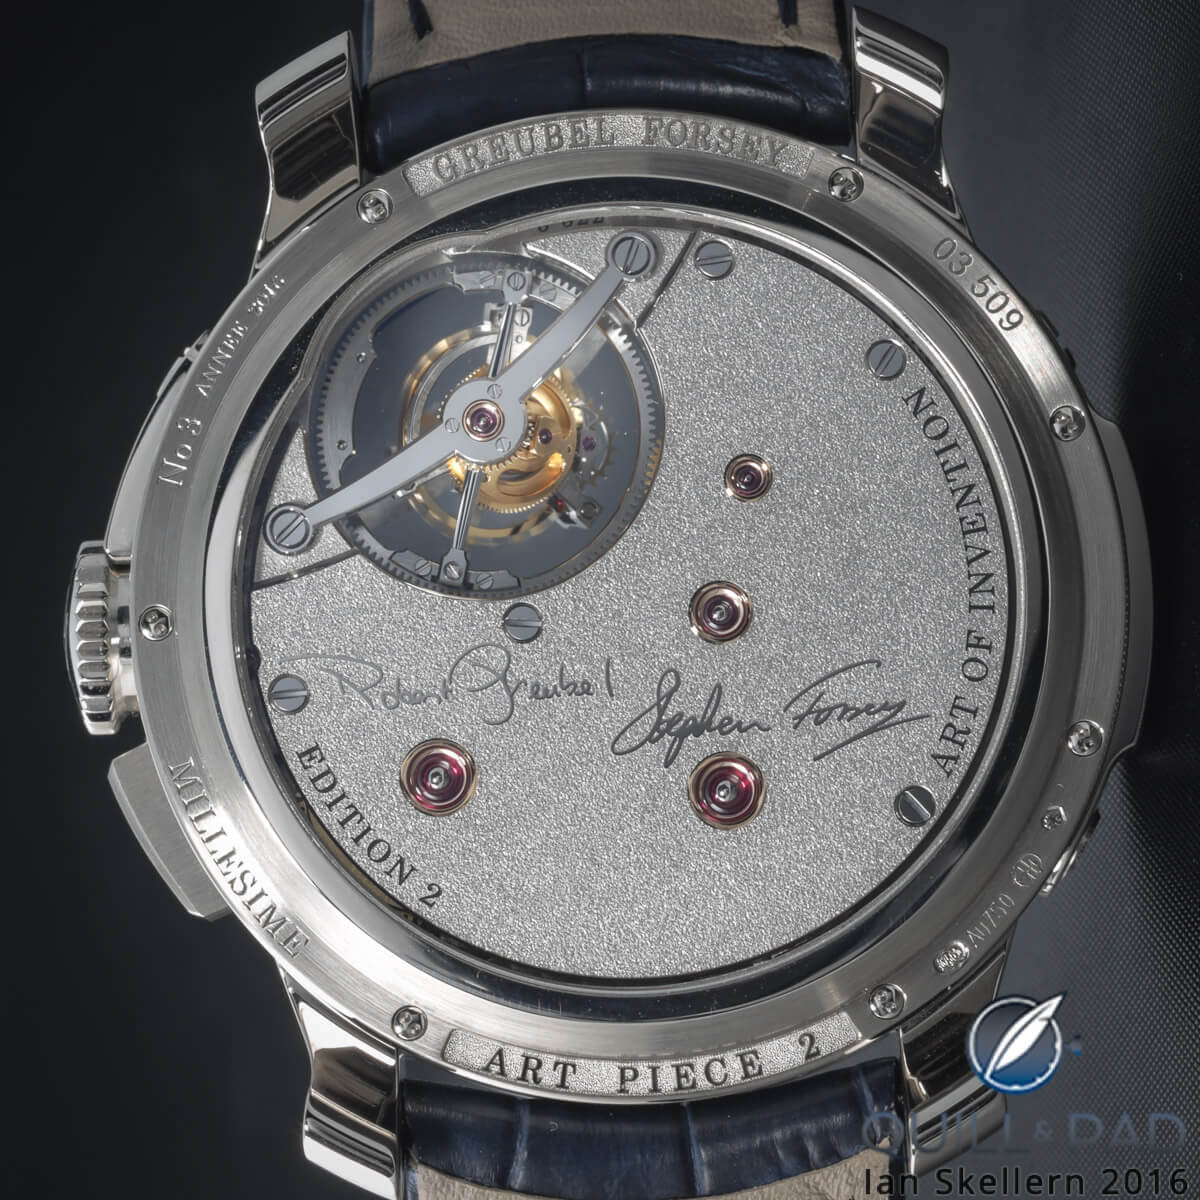 View through the display back to the artists' signatures on the back of the Greubel Forsey Art Piece 2 Edition 2